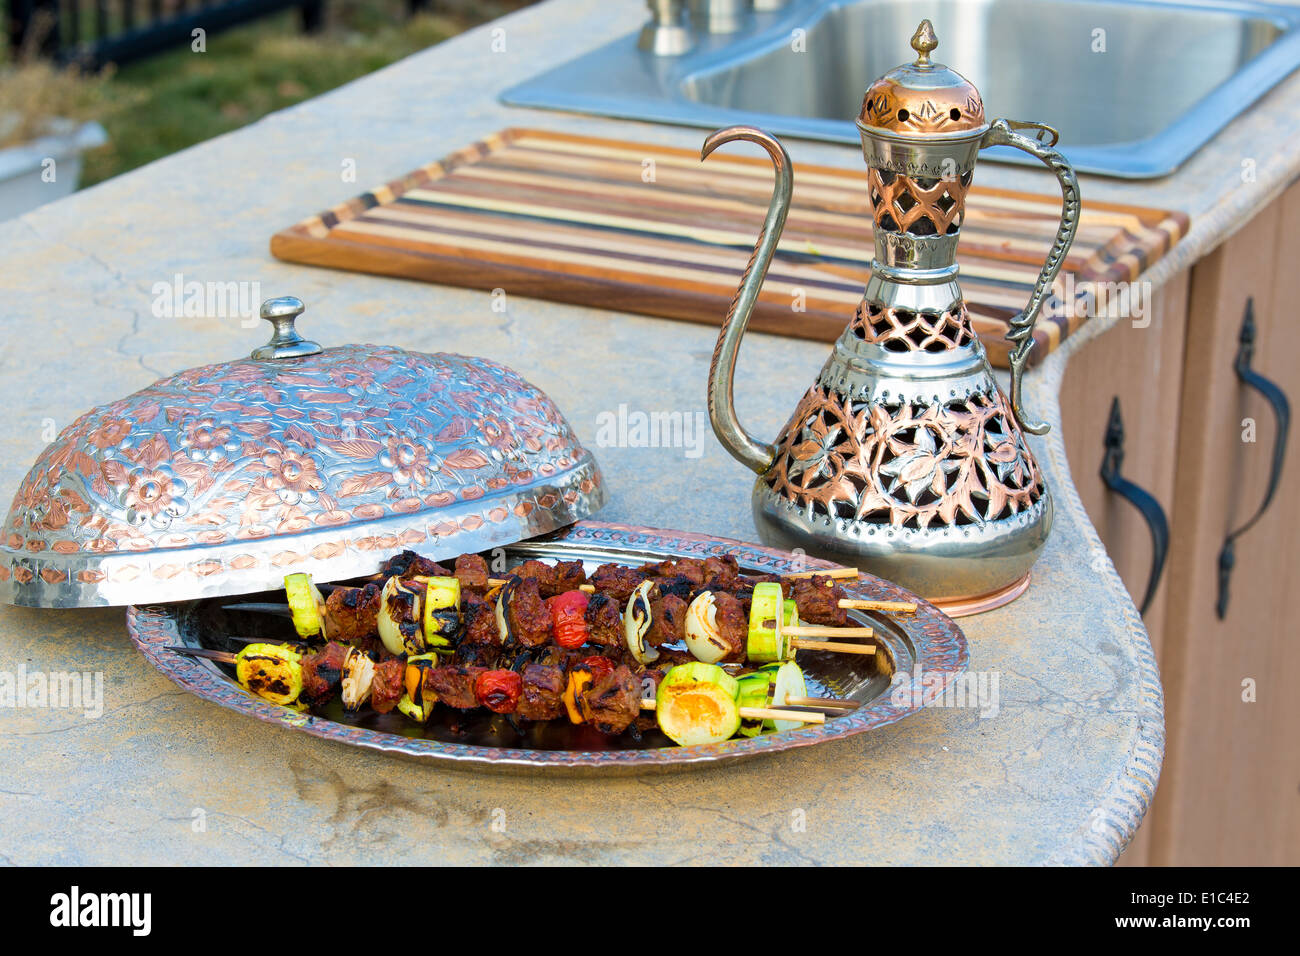 https://c8.alamy.com/comp/E1C4E2/grilled-beef-kebabs-with-tomato-onion-and-zucchini-served-on-a-metal-E1C4E2.jpg